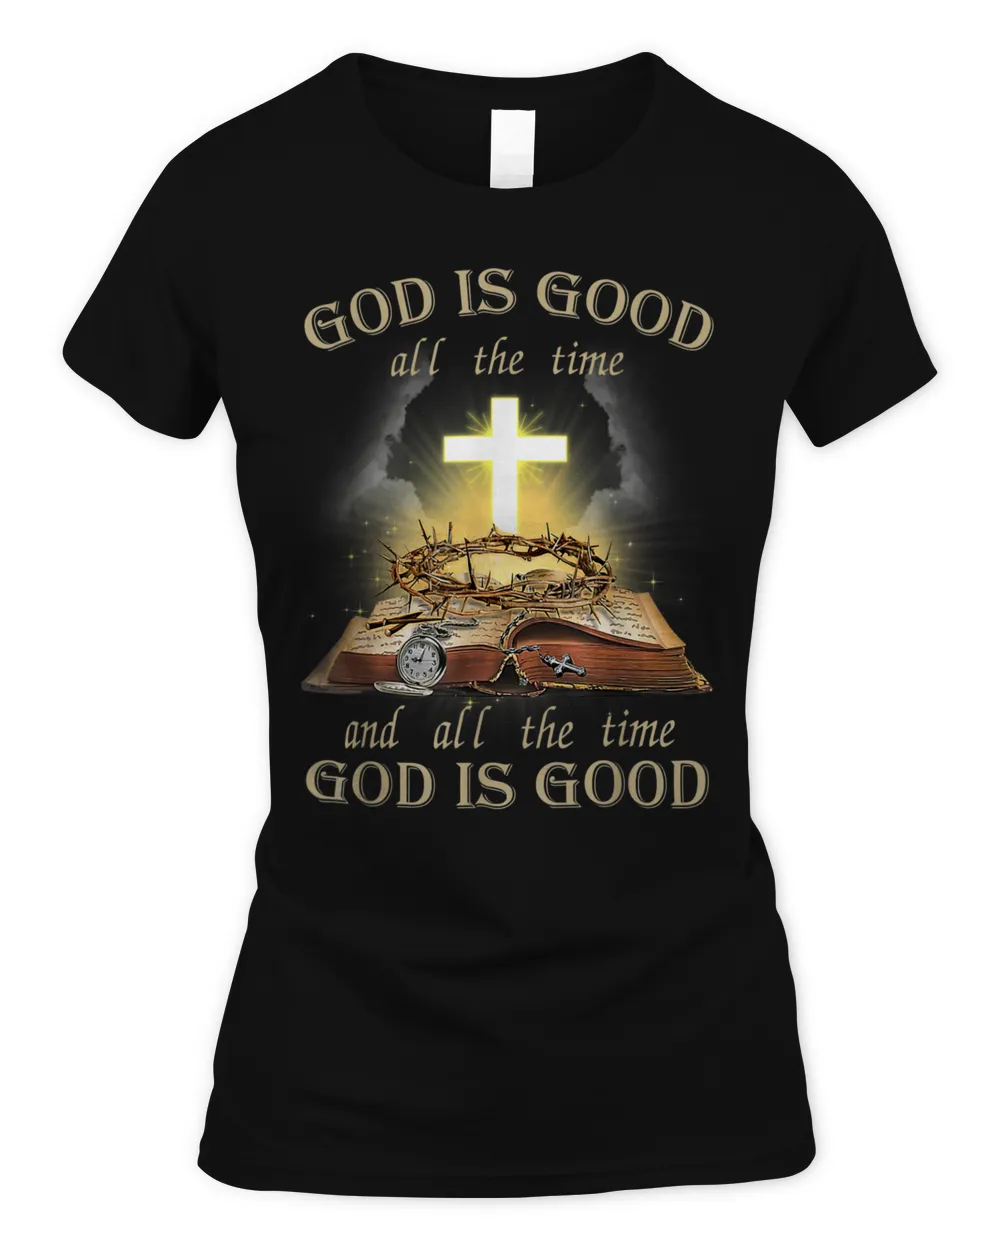 God Is Good All The Time And All The Time God Is Good Christian Shirt, Religious Shirt, Jesus shirt, Christian Gift